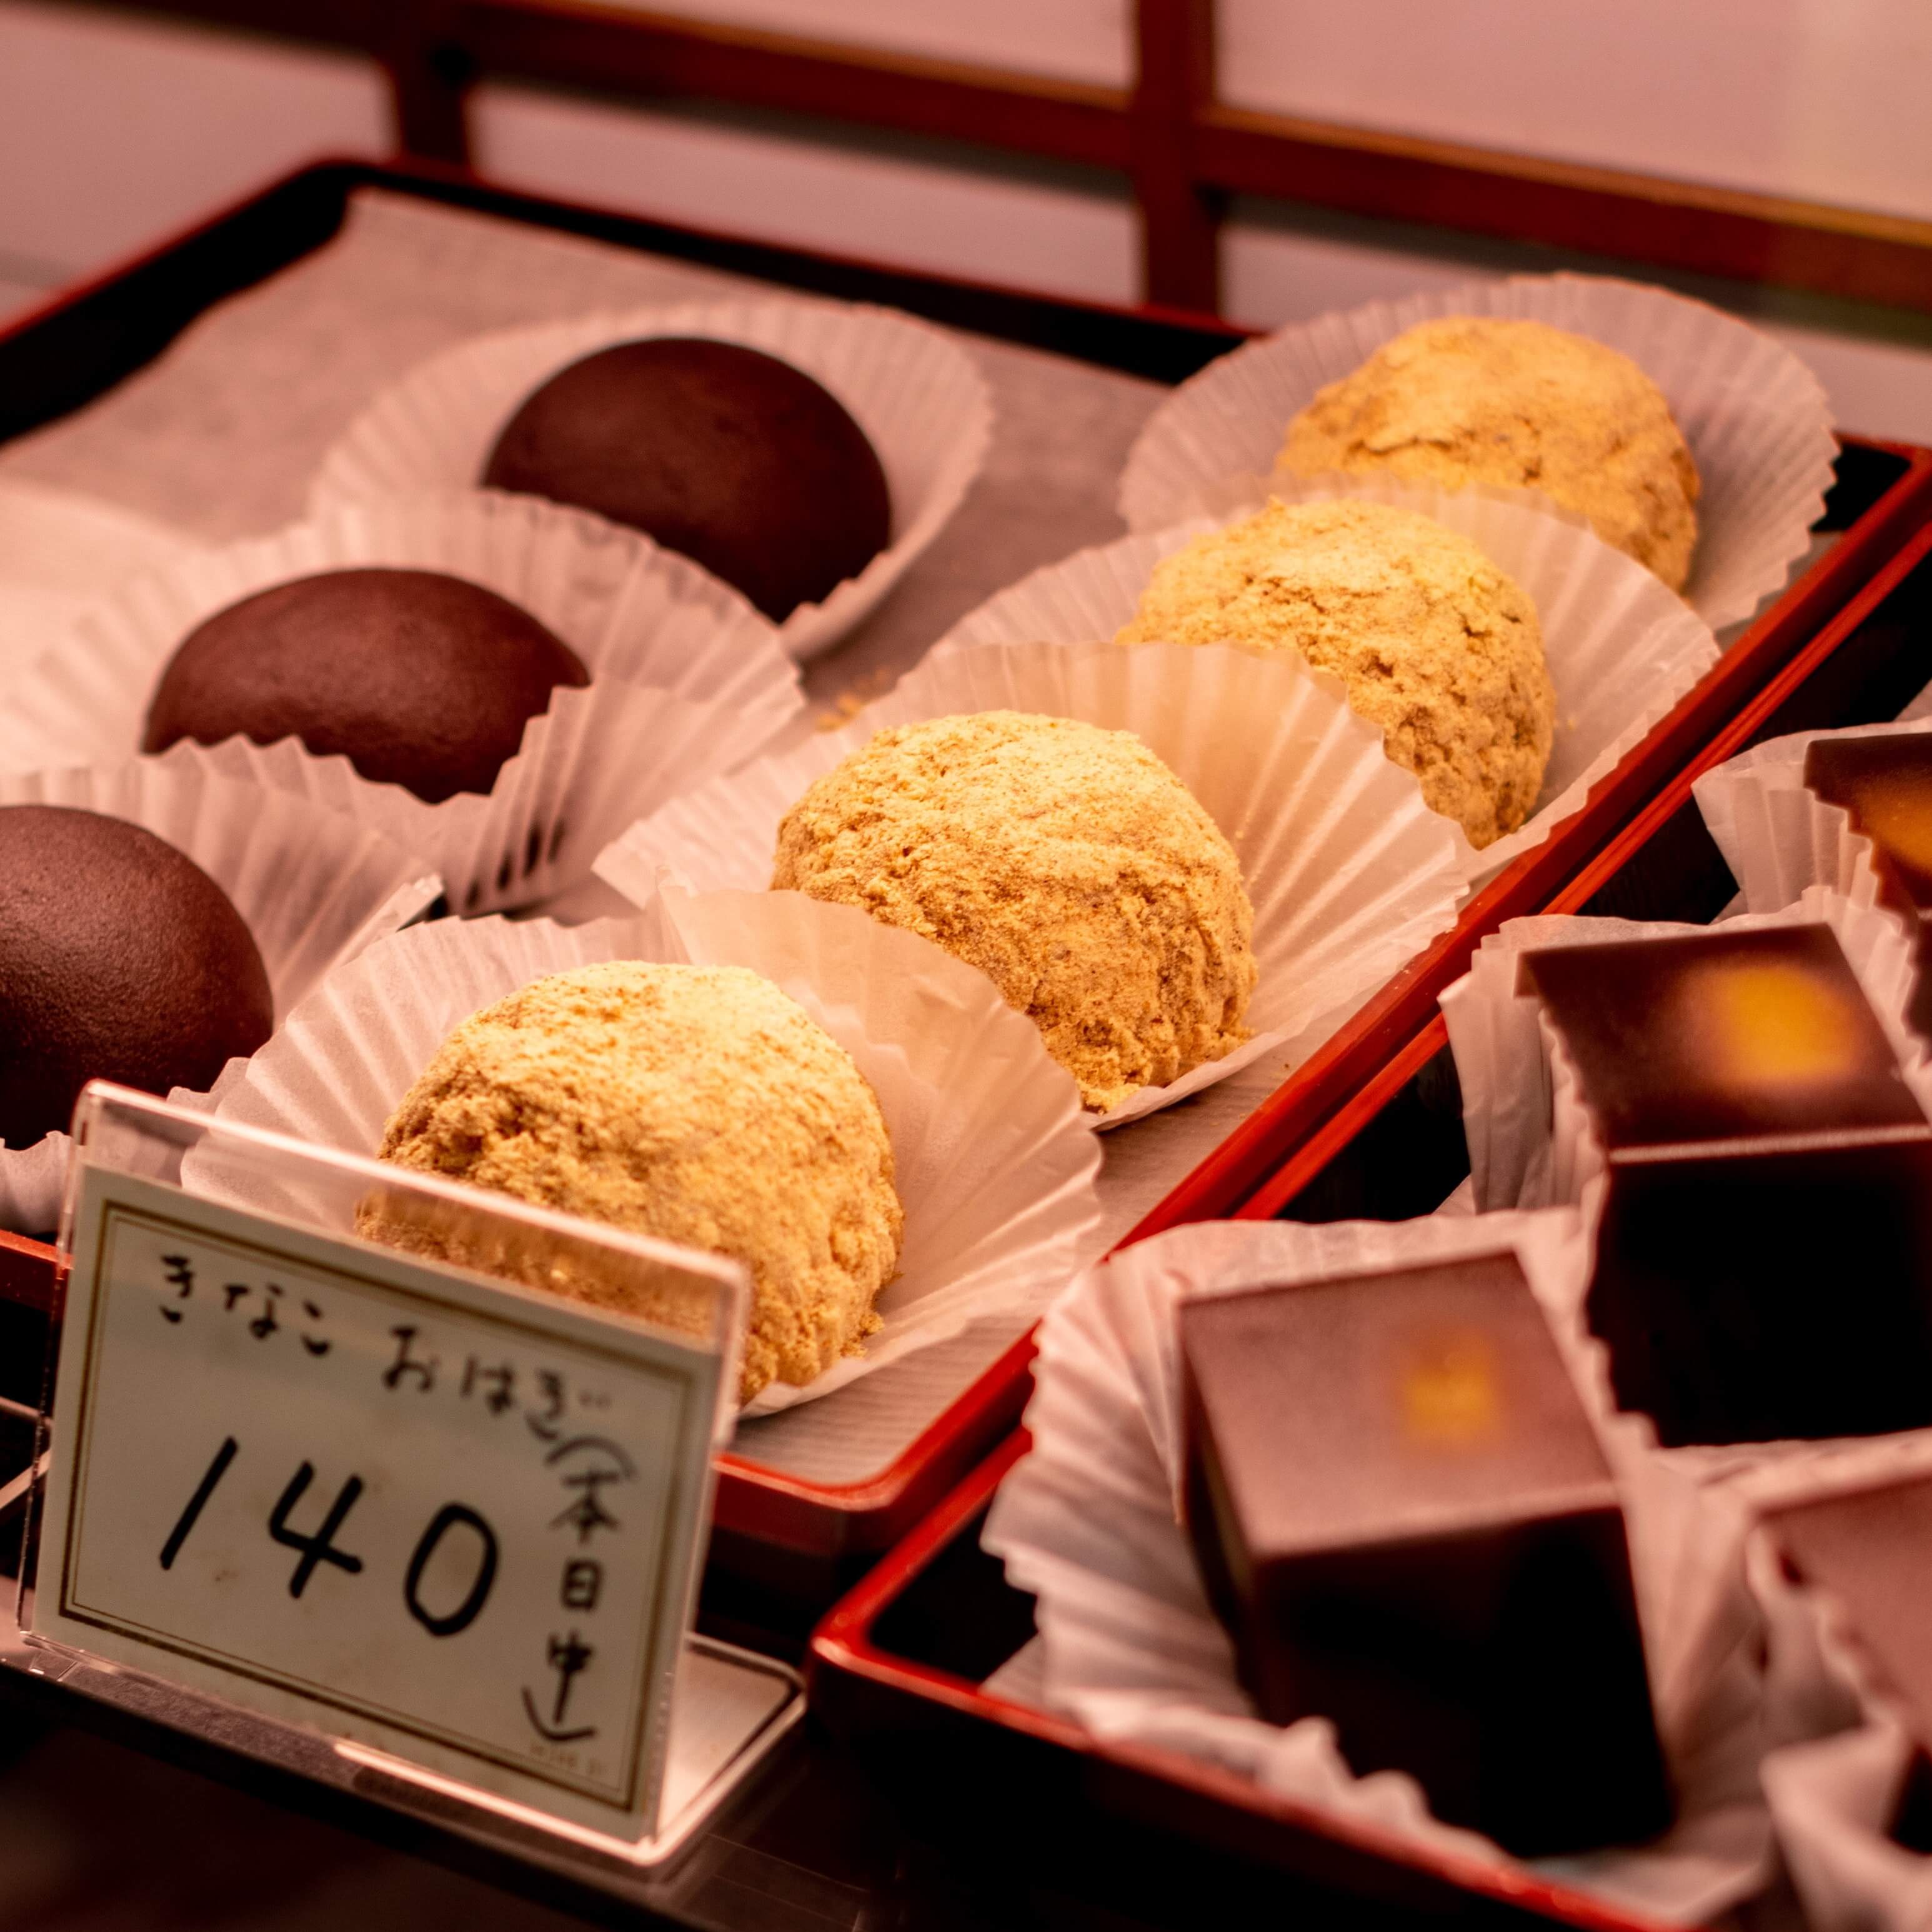 Wagashi or Traditional Japanese Sweets